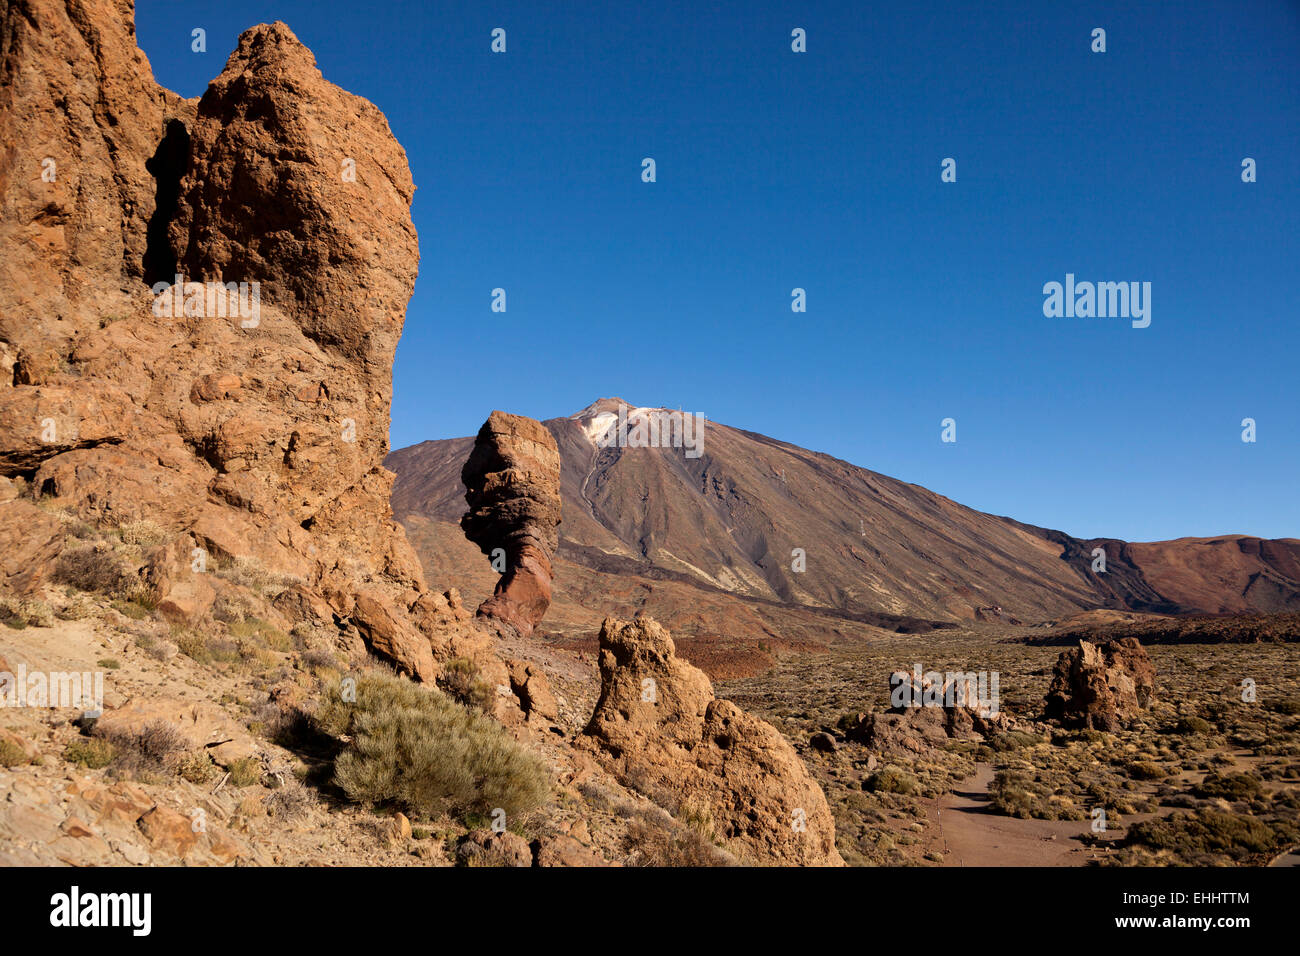 rock formation Roques de Garcia and mount Pico del Teide, Teide National Park, Tenerife, Canary Islands, Spain, Europe Stock Photo